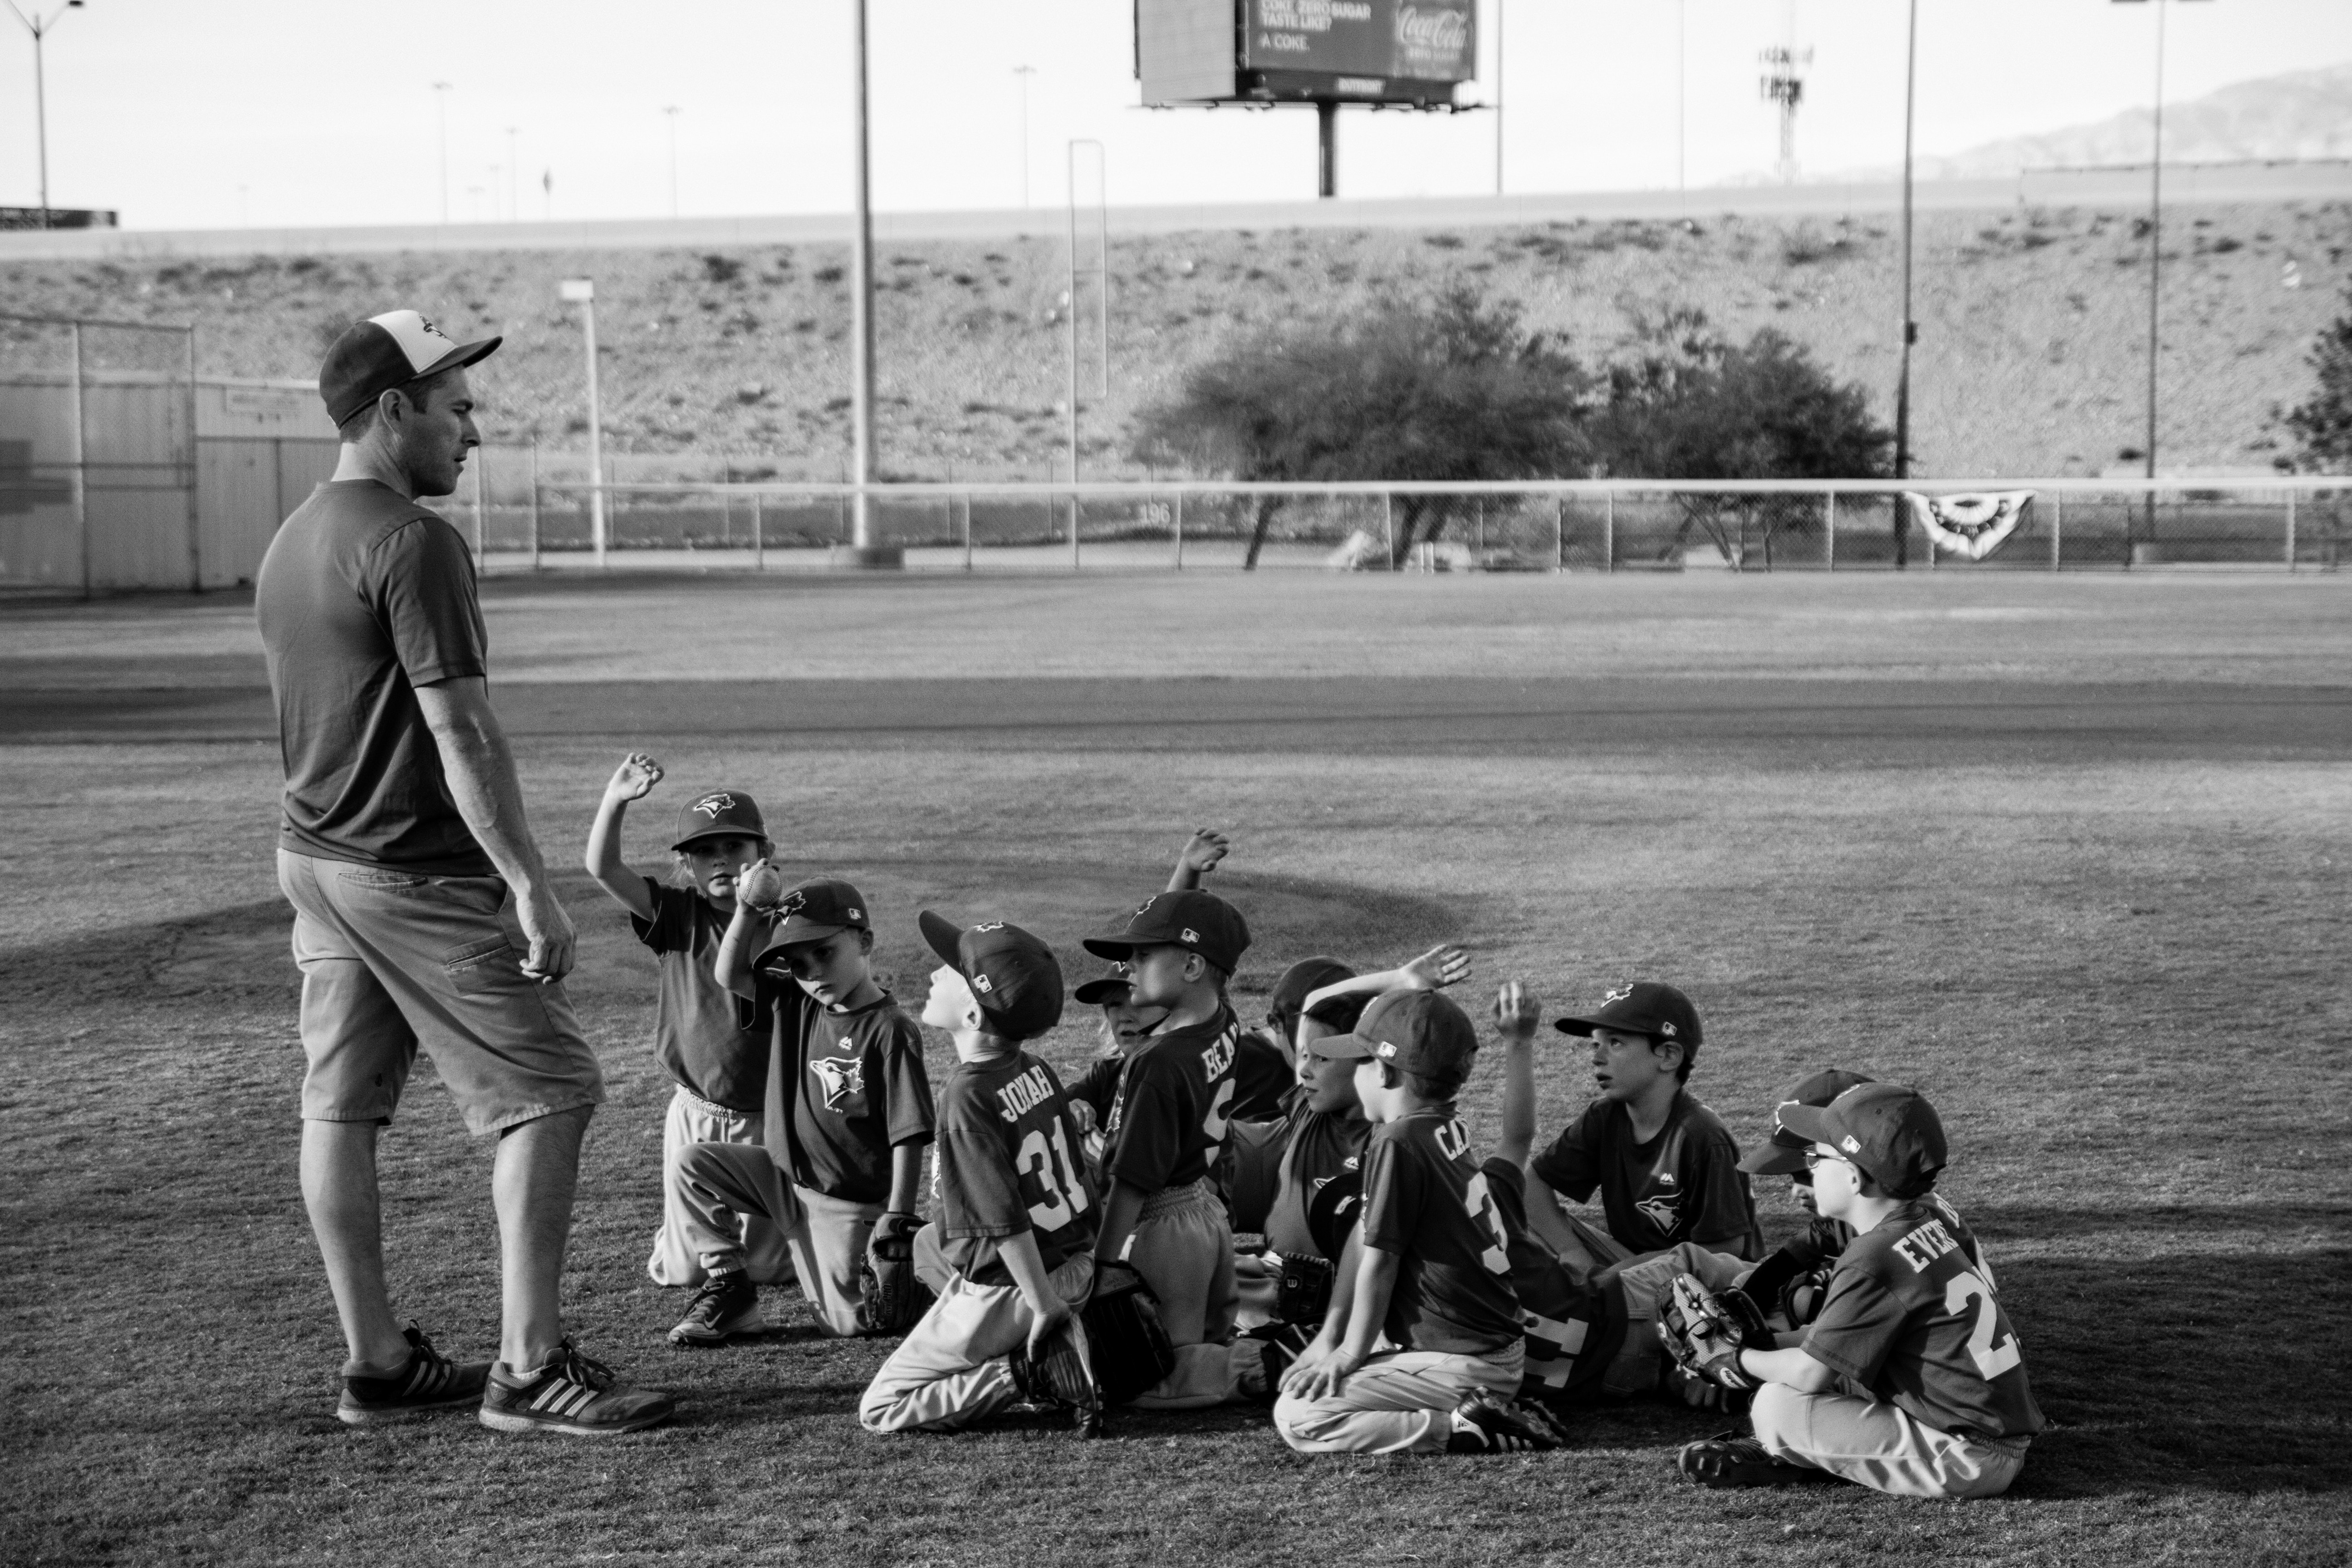 Coaching T-ball is always an adventure #dads #moms #coach